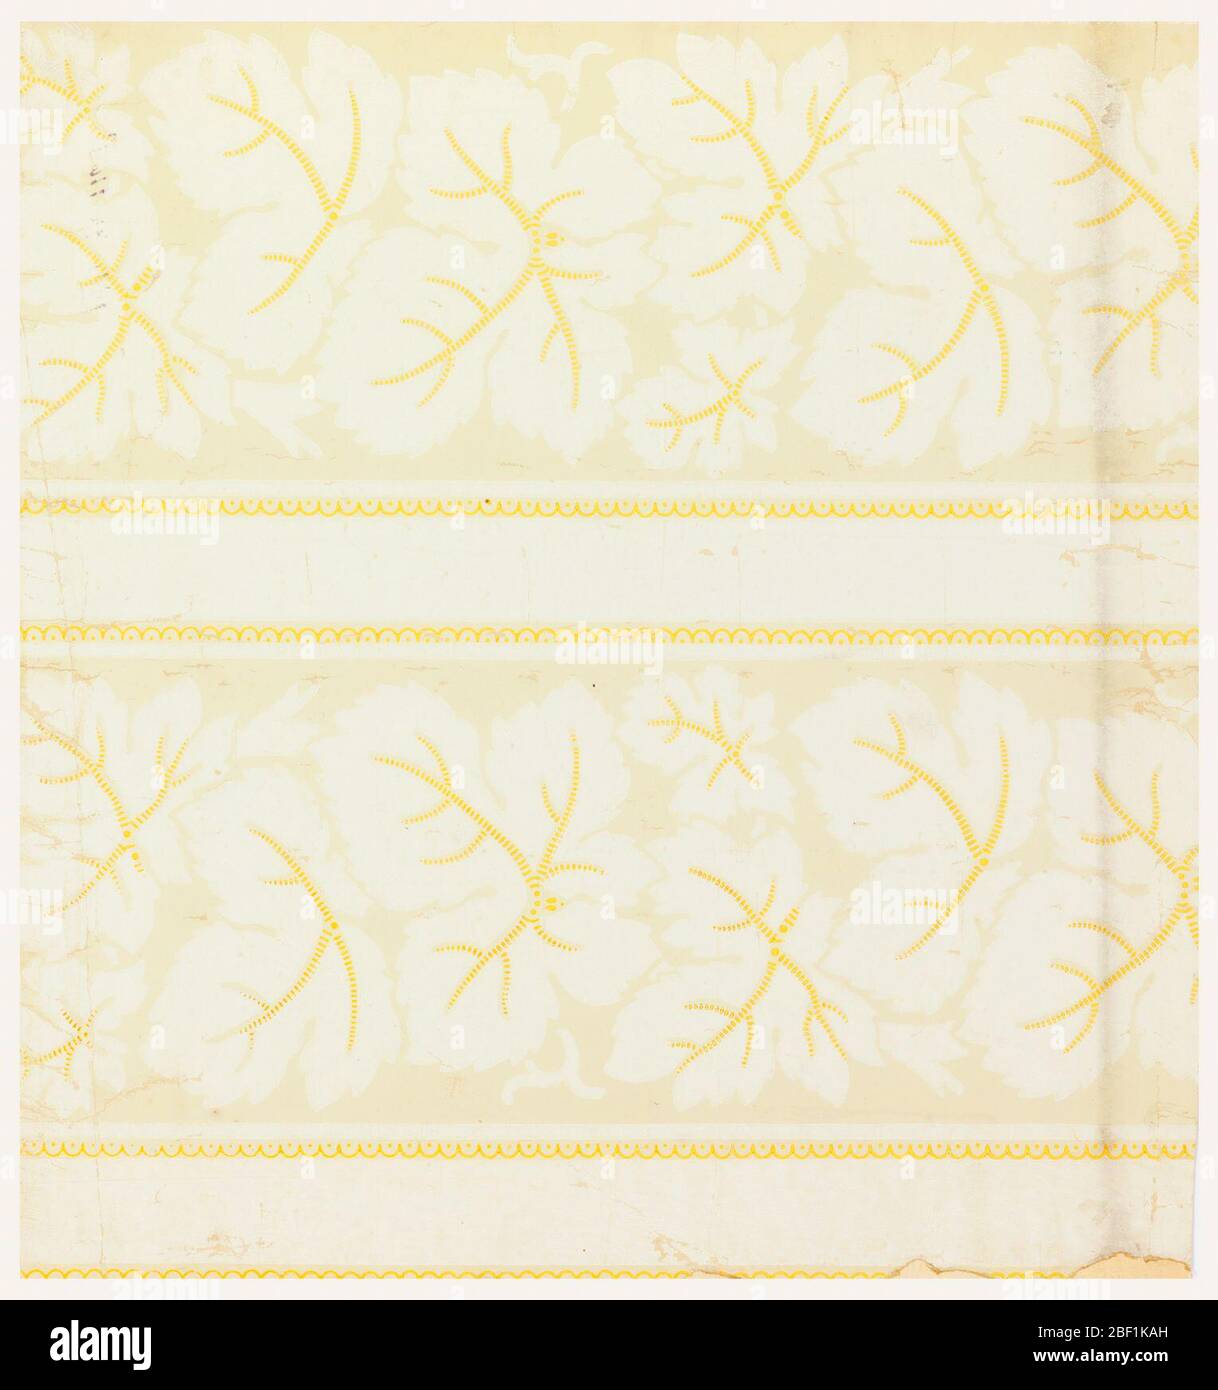 Sidewall and border. Vertical rectangle. Double vertical panels containing dentate leaves in white, with golden yellow veins and scalloped. Printed in colors and glazed. Stock Photo